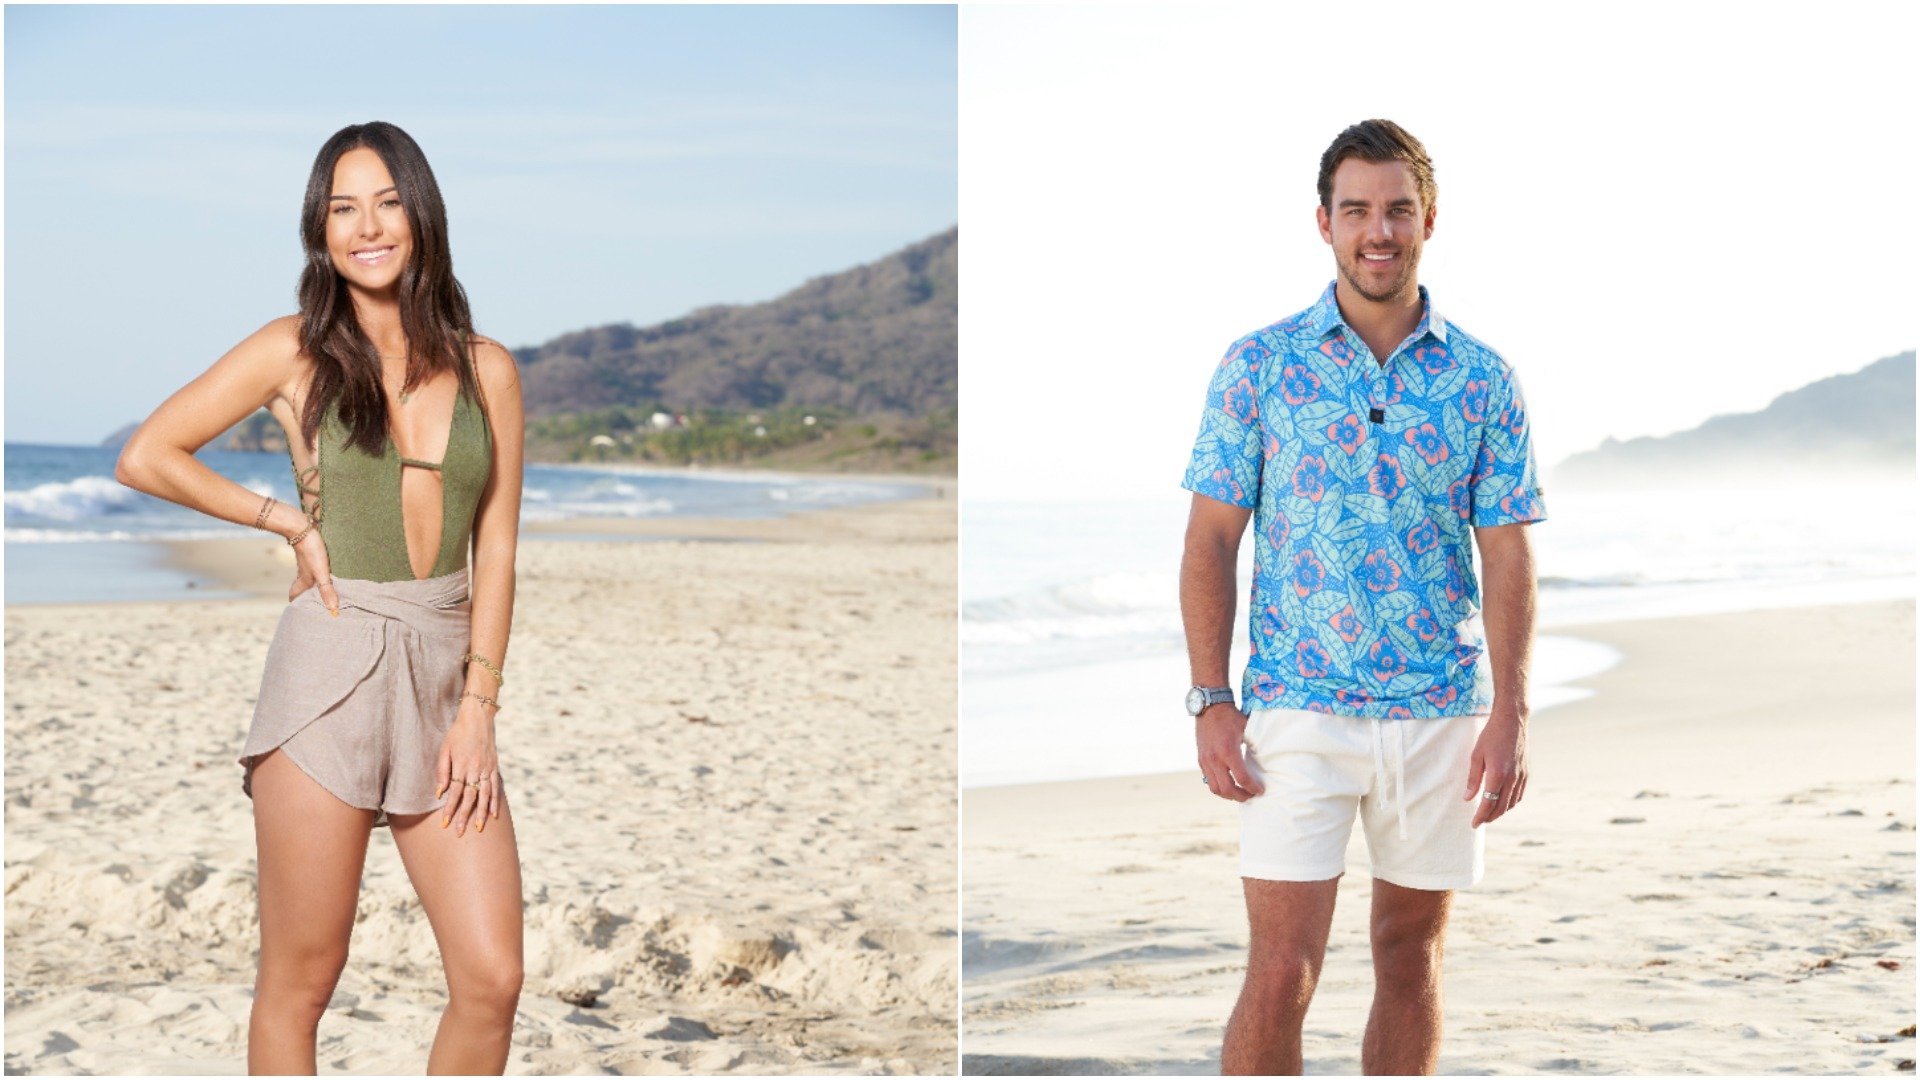 Headshots of Abigail Heringer and Noah Erb from 'Bachelor in Paradise'